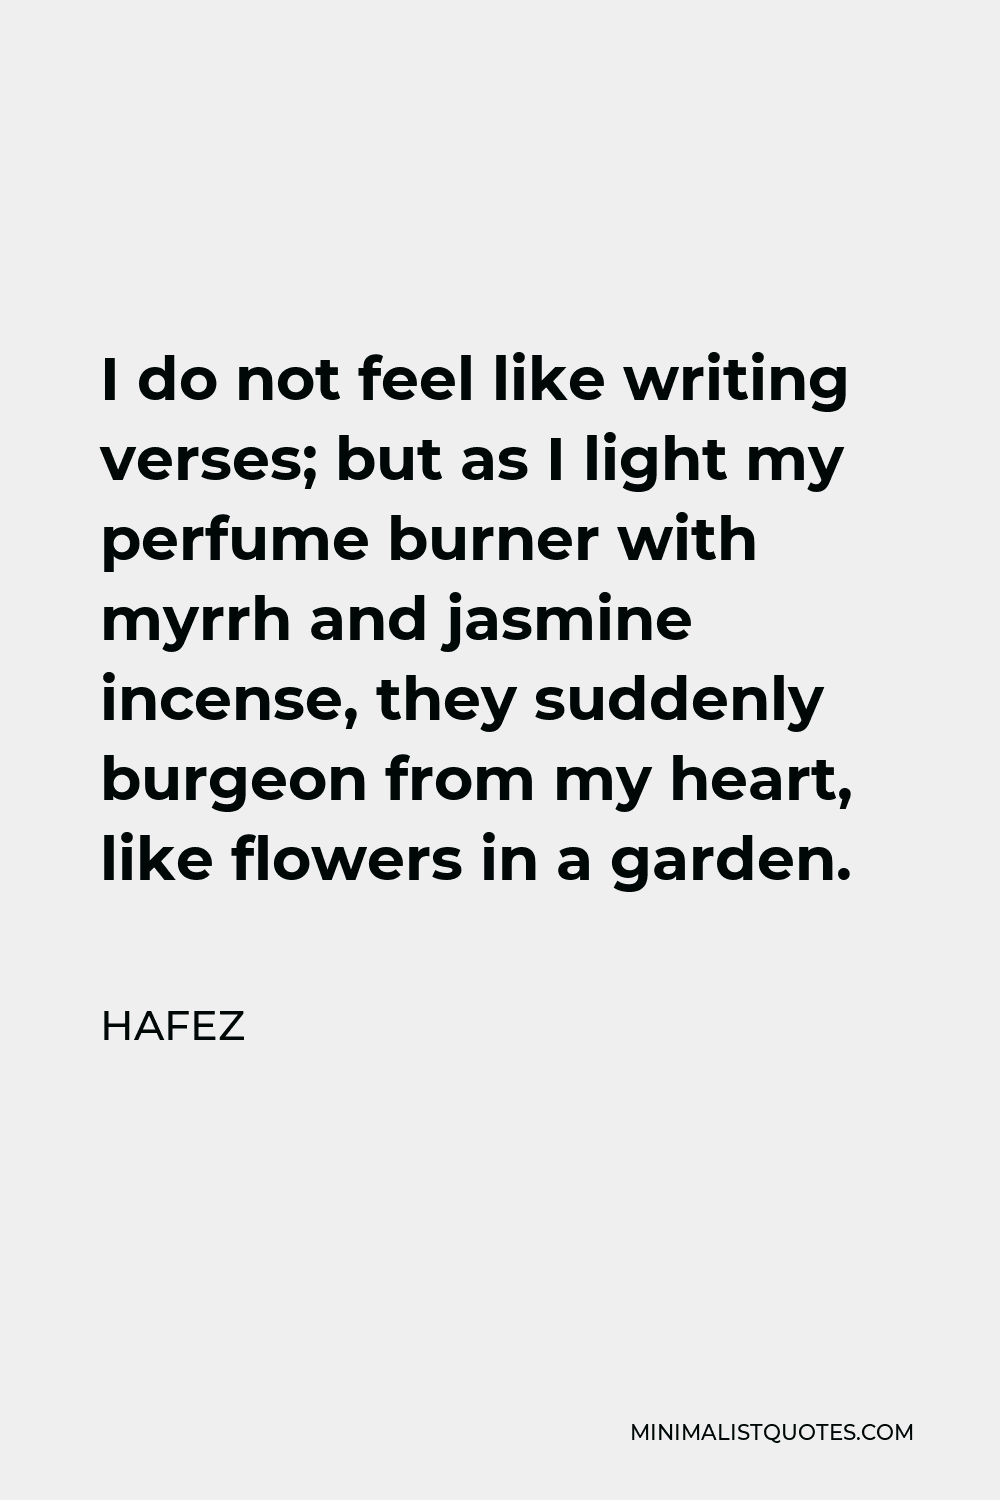 Hafez Quote - I do not feel like writing verses; but as I light my perfume burner with myrrh and jasmine incense, they suddenly burgeon from my heart, like flowers in a garden.